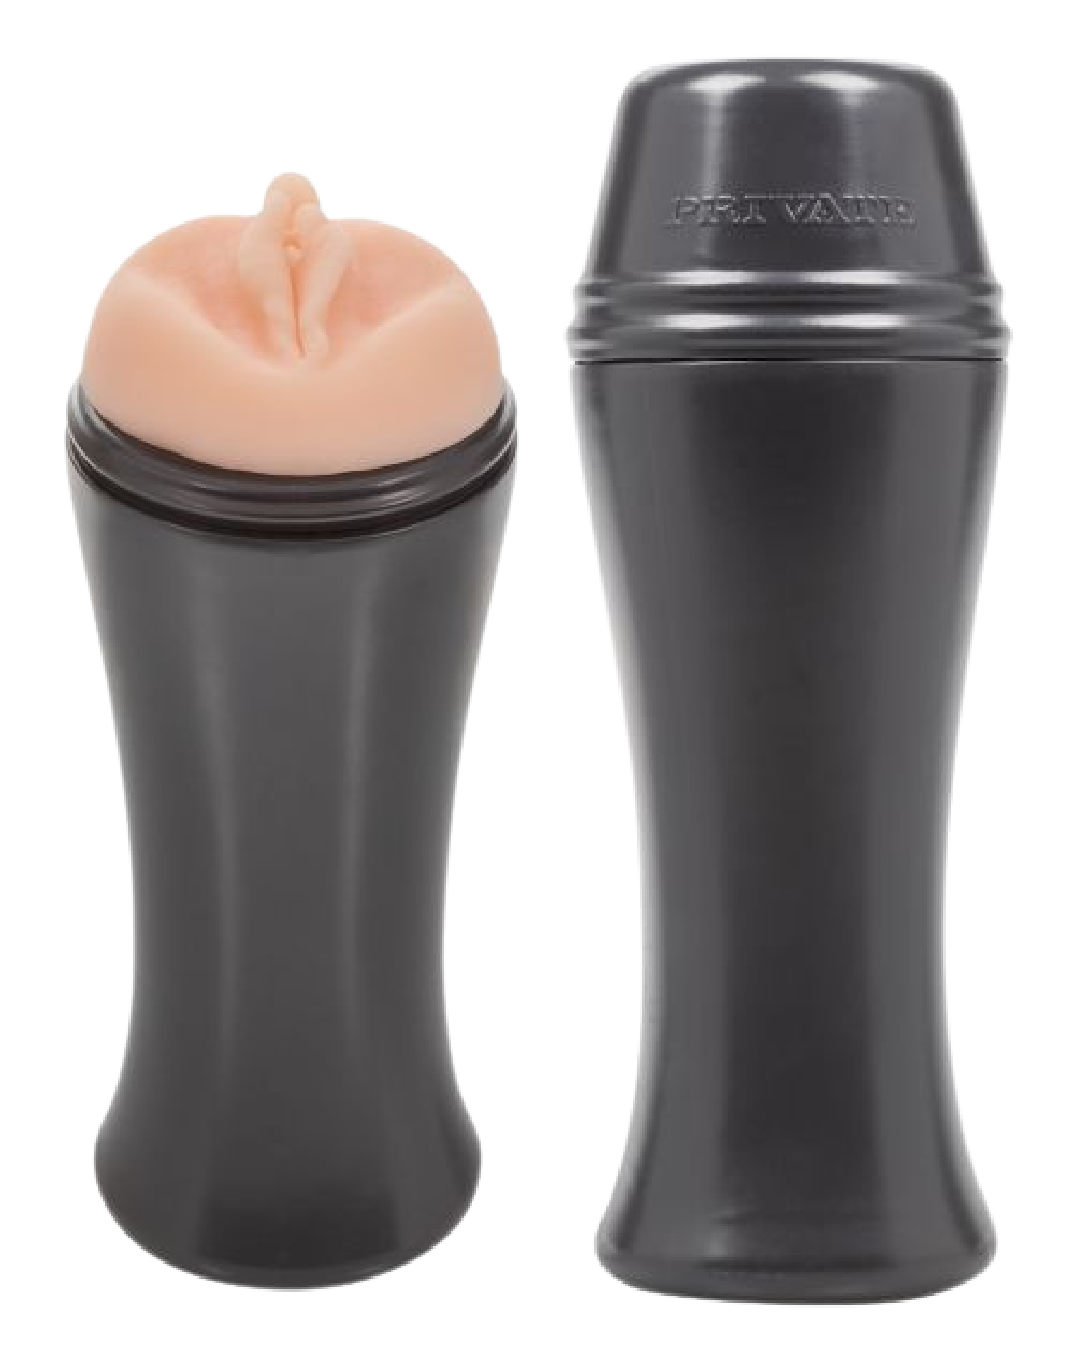 Private Hot Bombshell to Go Realistic Travel Stroker (Vagina)  two views - one with and one without the lid